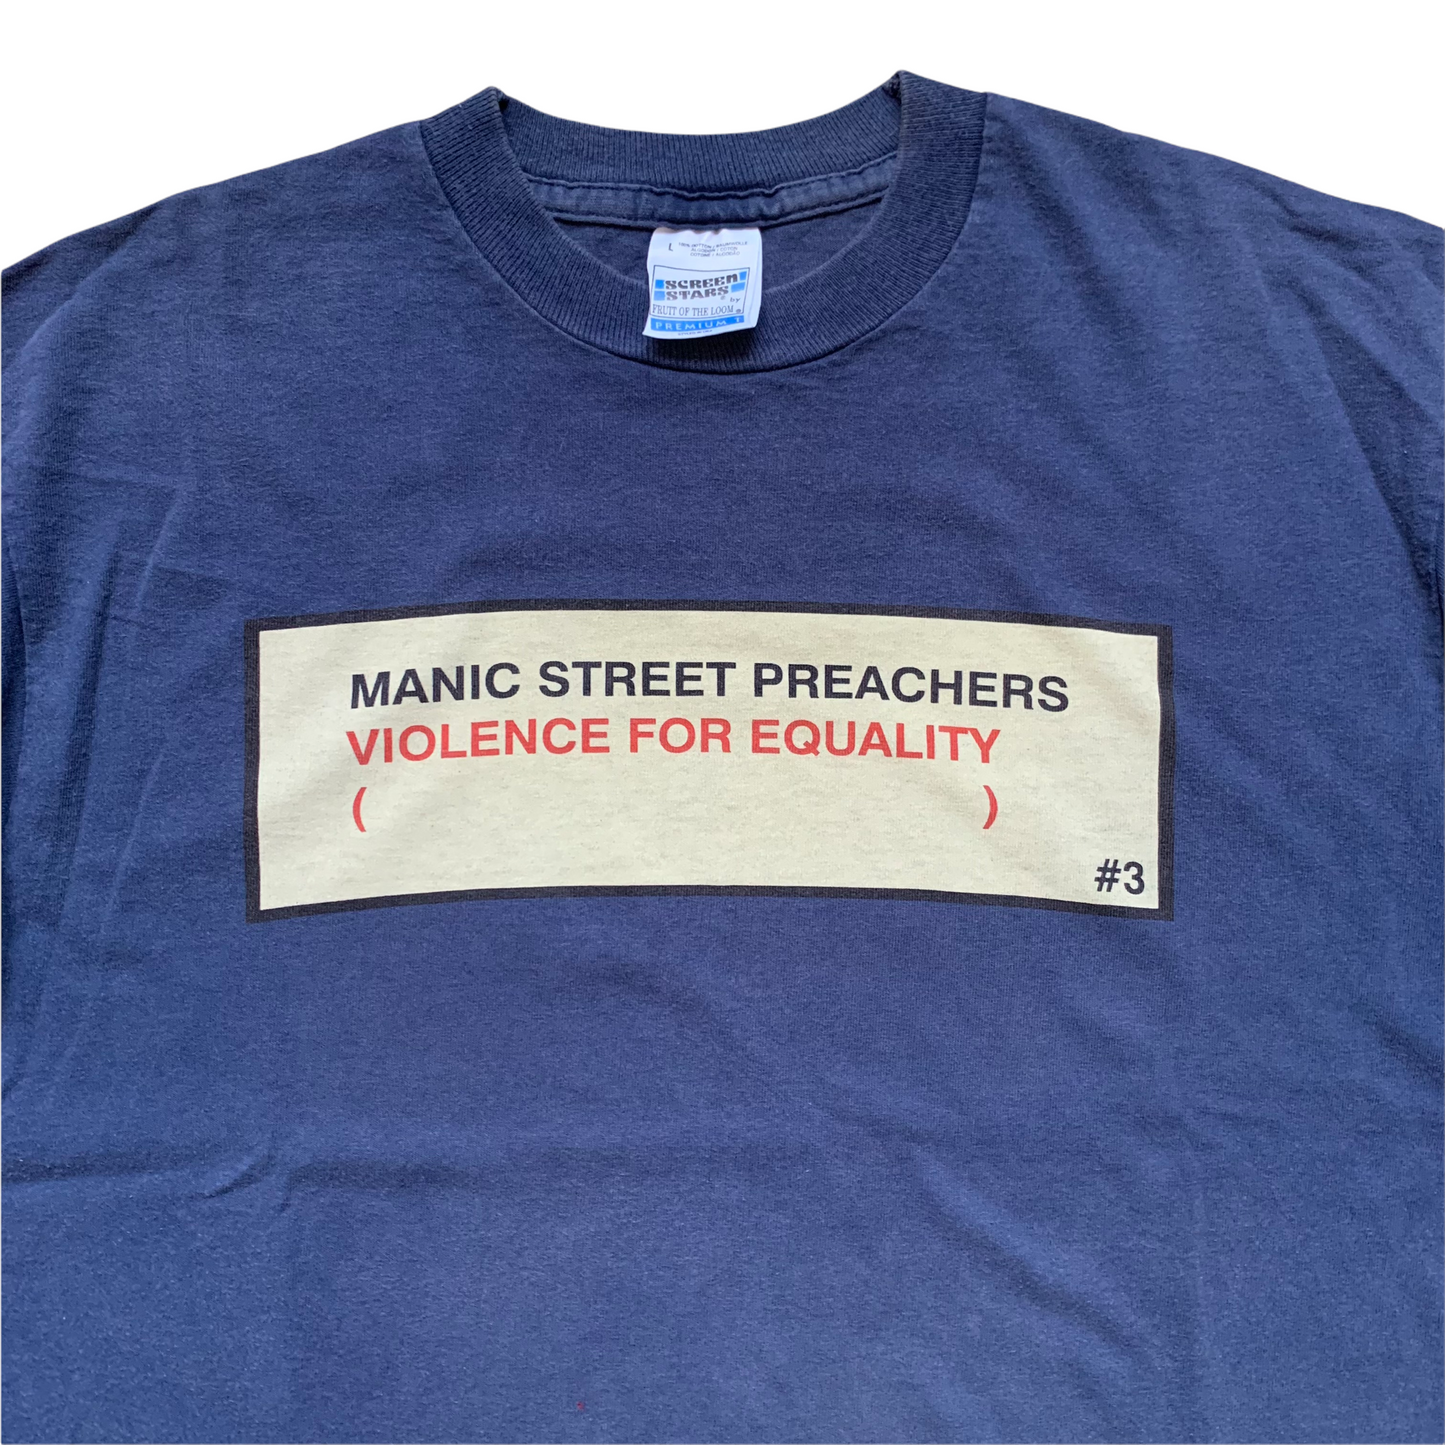 1996 Manic Street Preachers ‘Violence For Equality’ (L) 